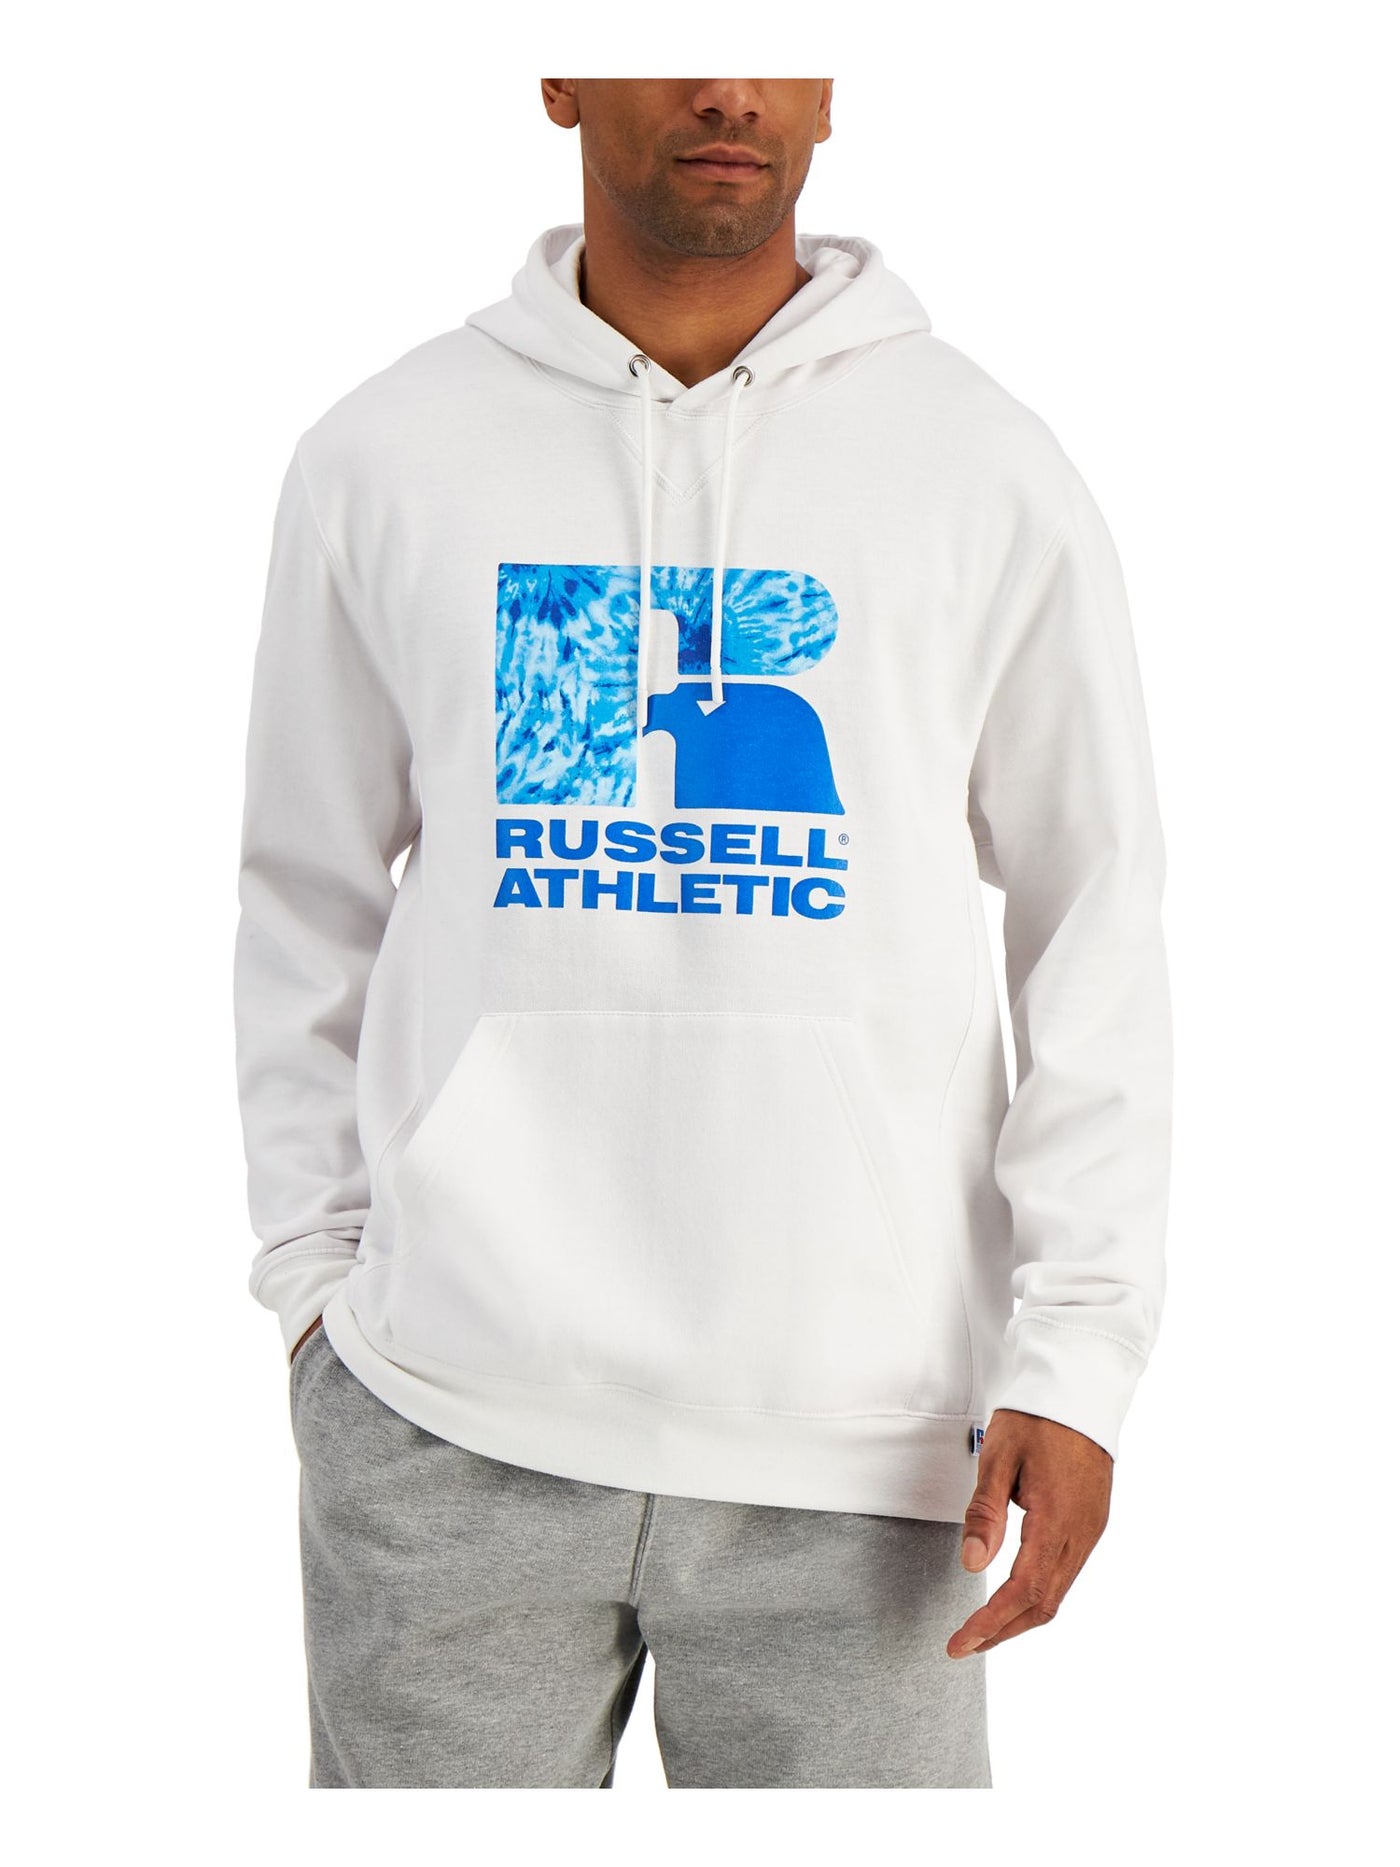 RUSSELL ATHLETIC Mens Santiago White Graphic Draw String Hoodie L